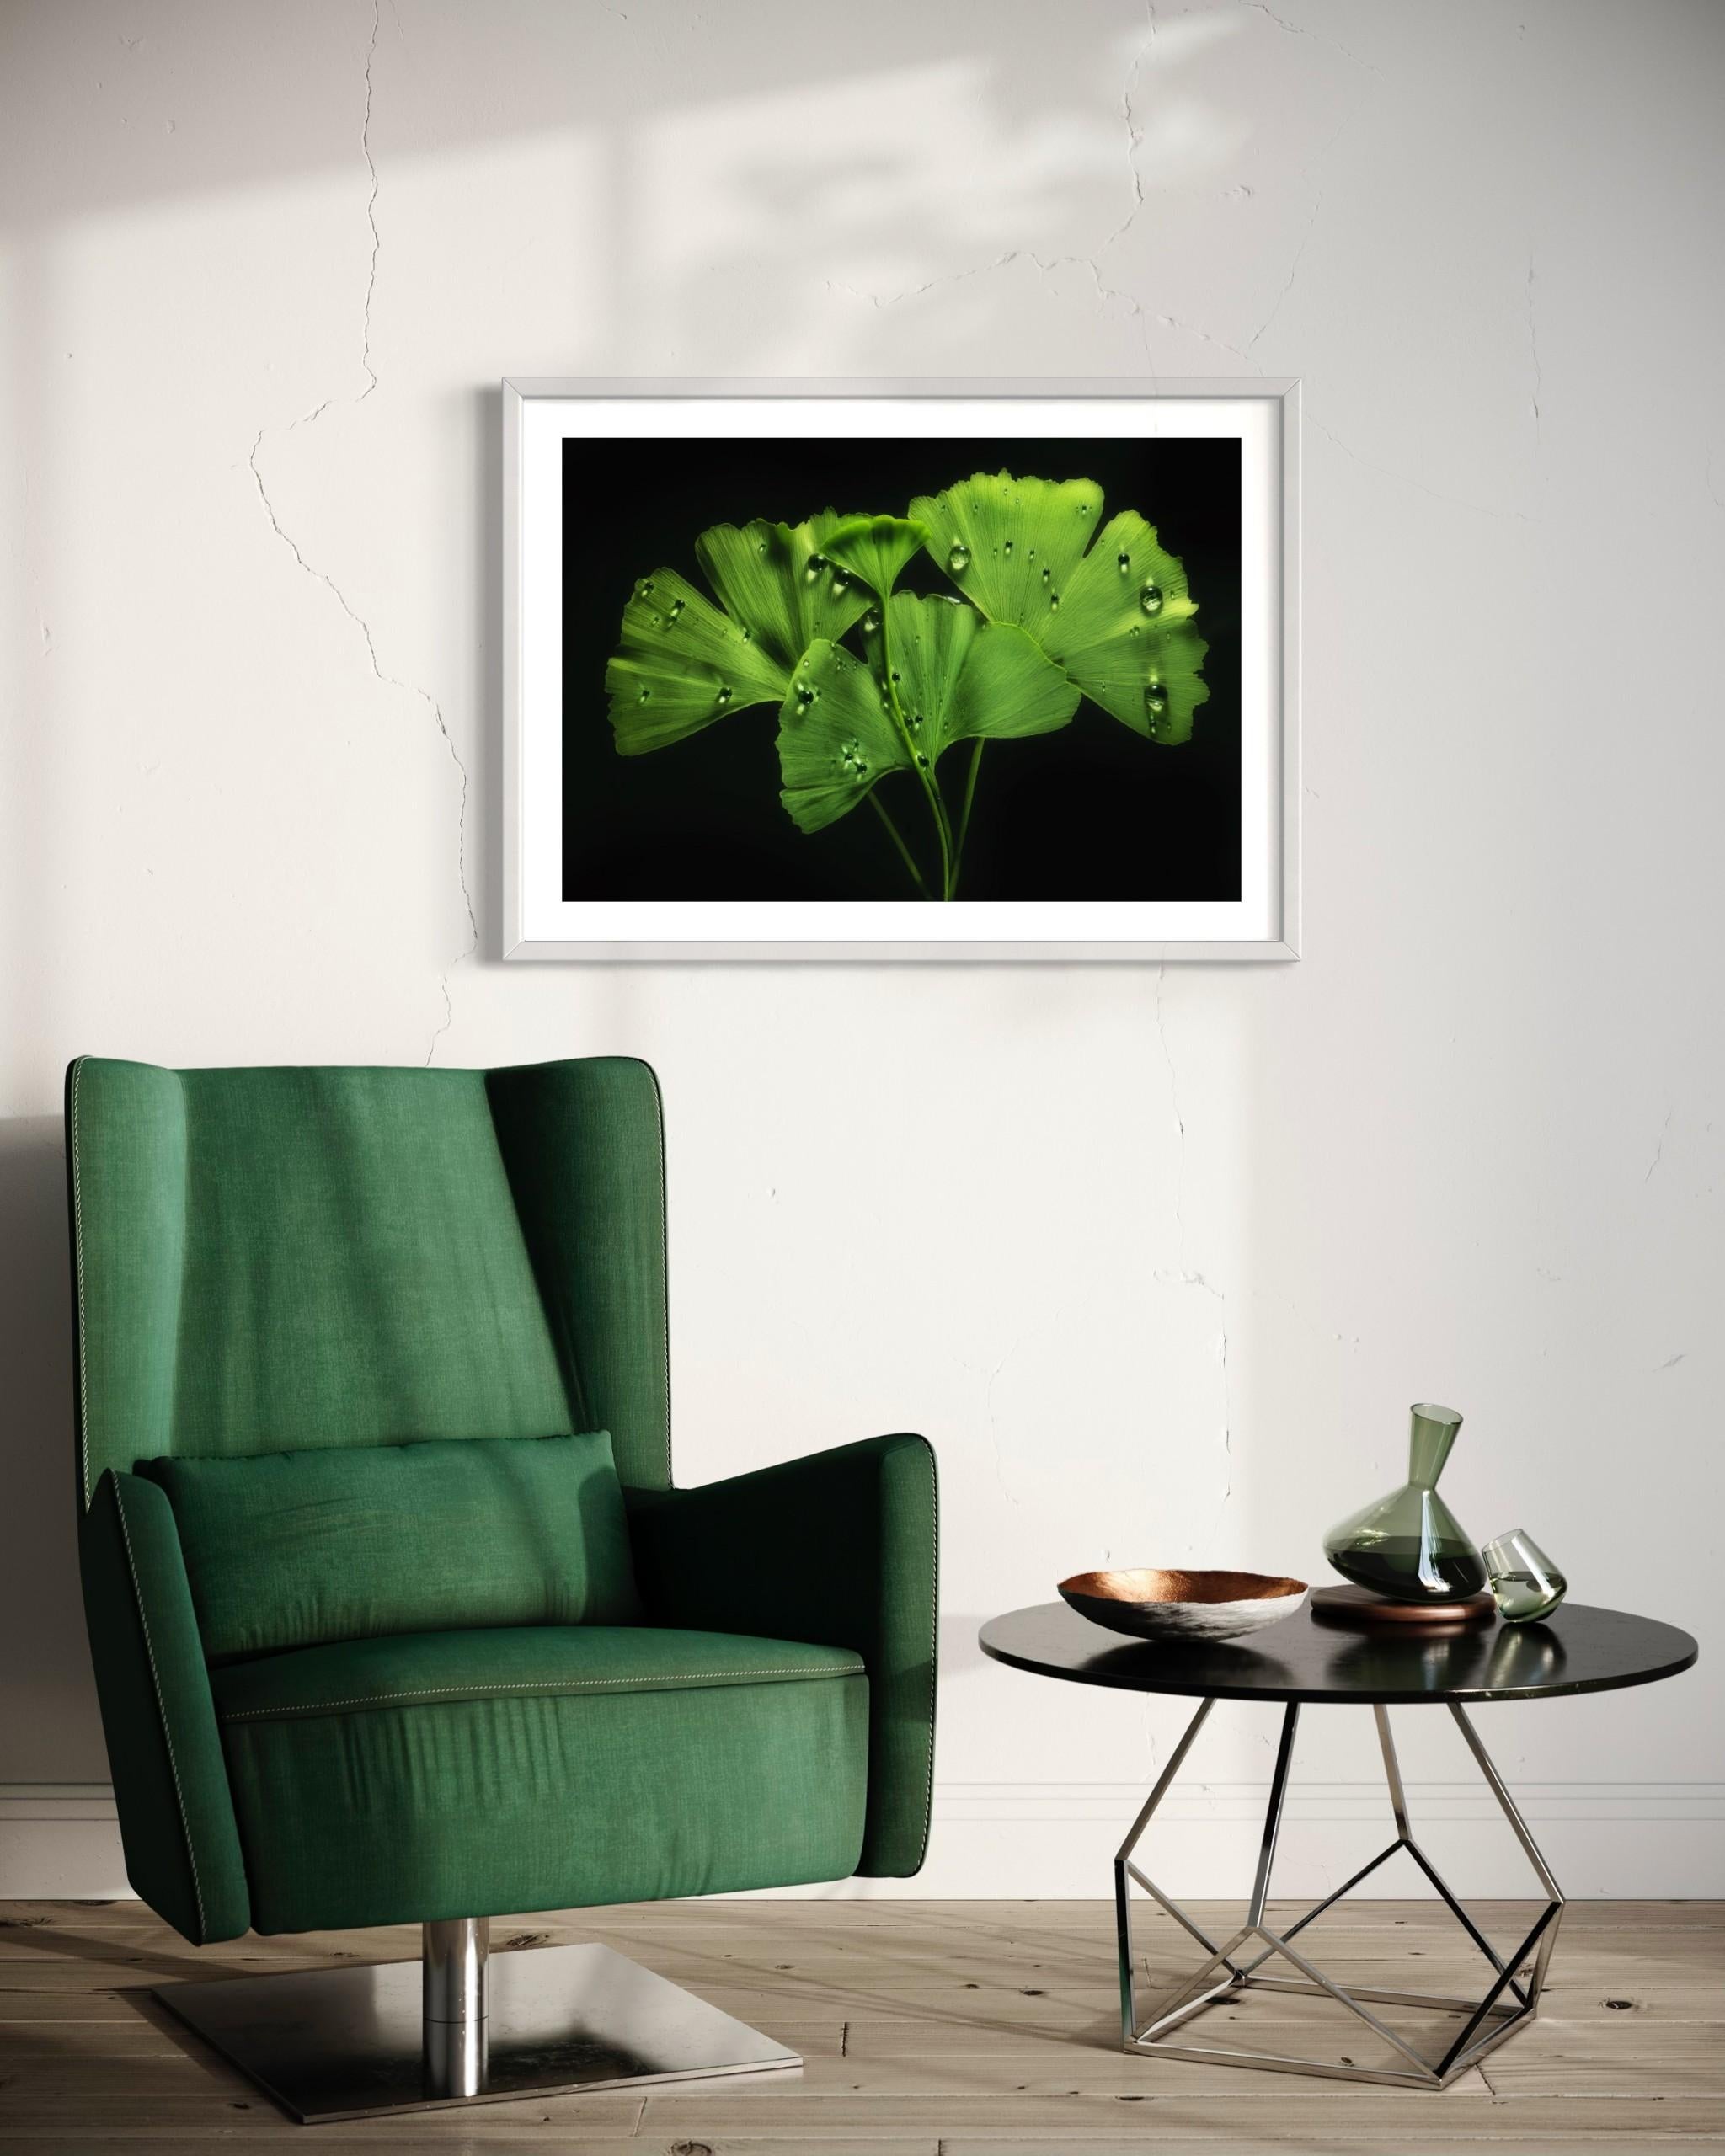 Ginko Biloba No. 1, floral photography, limited edition print, green art For Sale 5